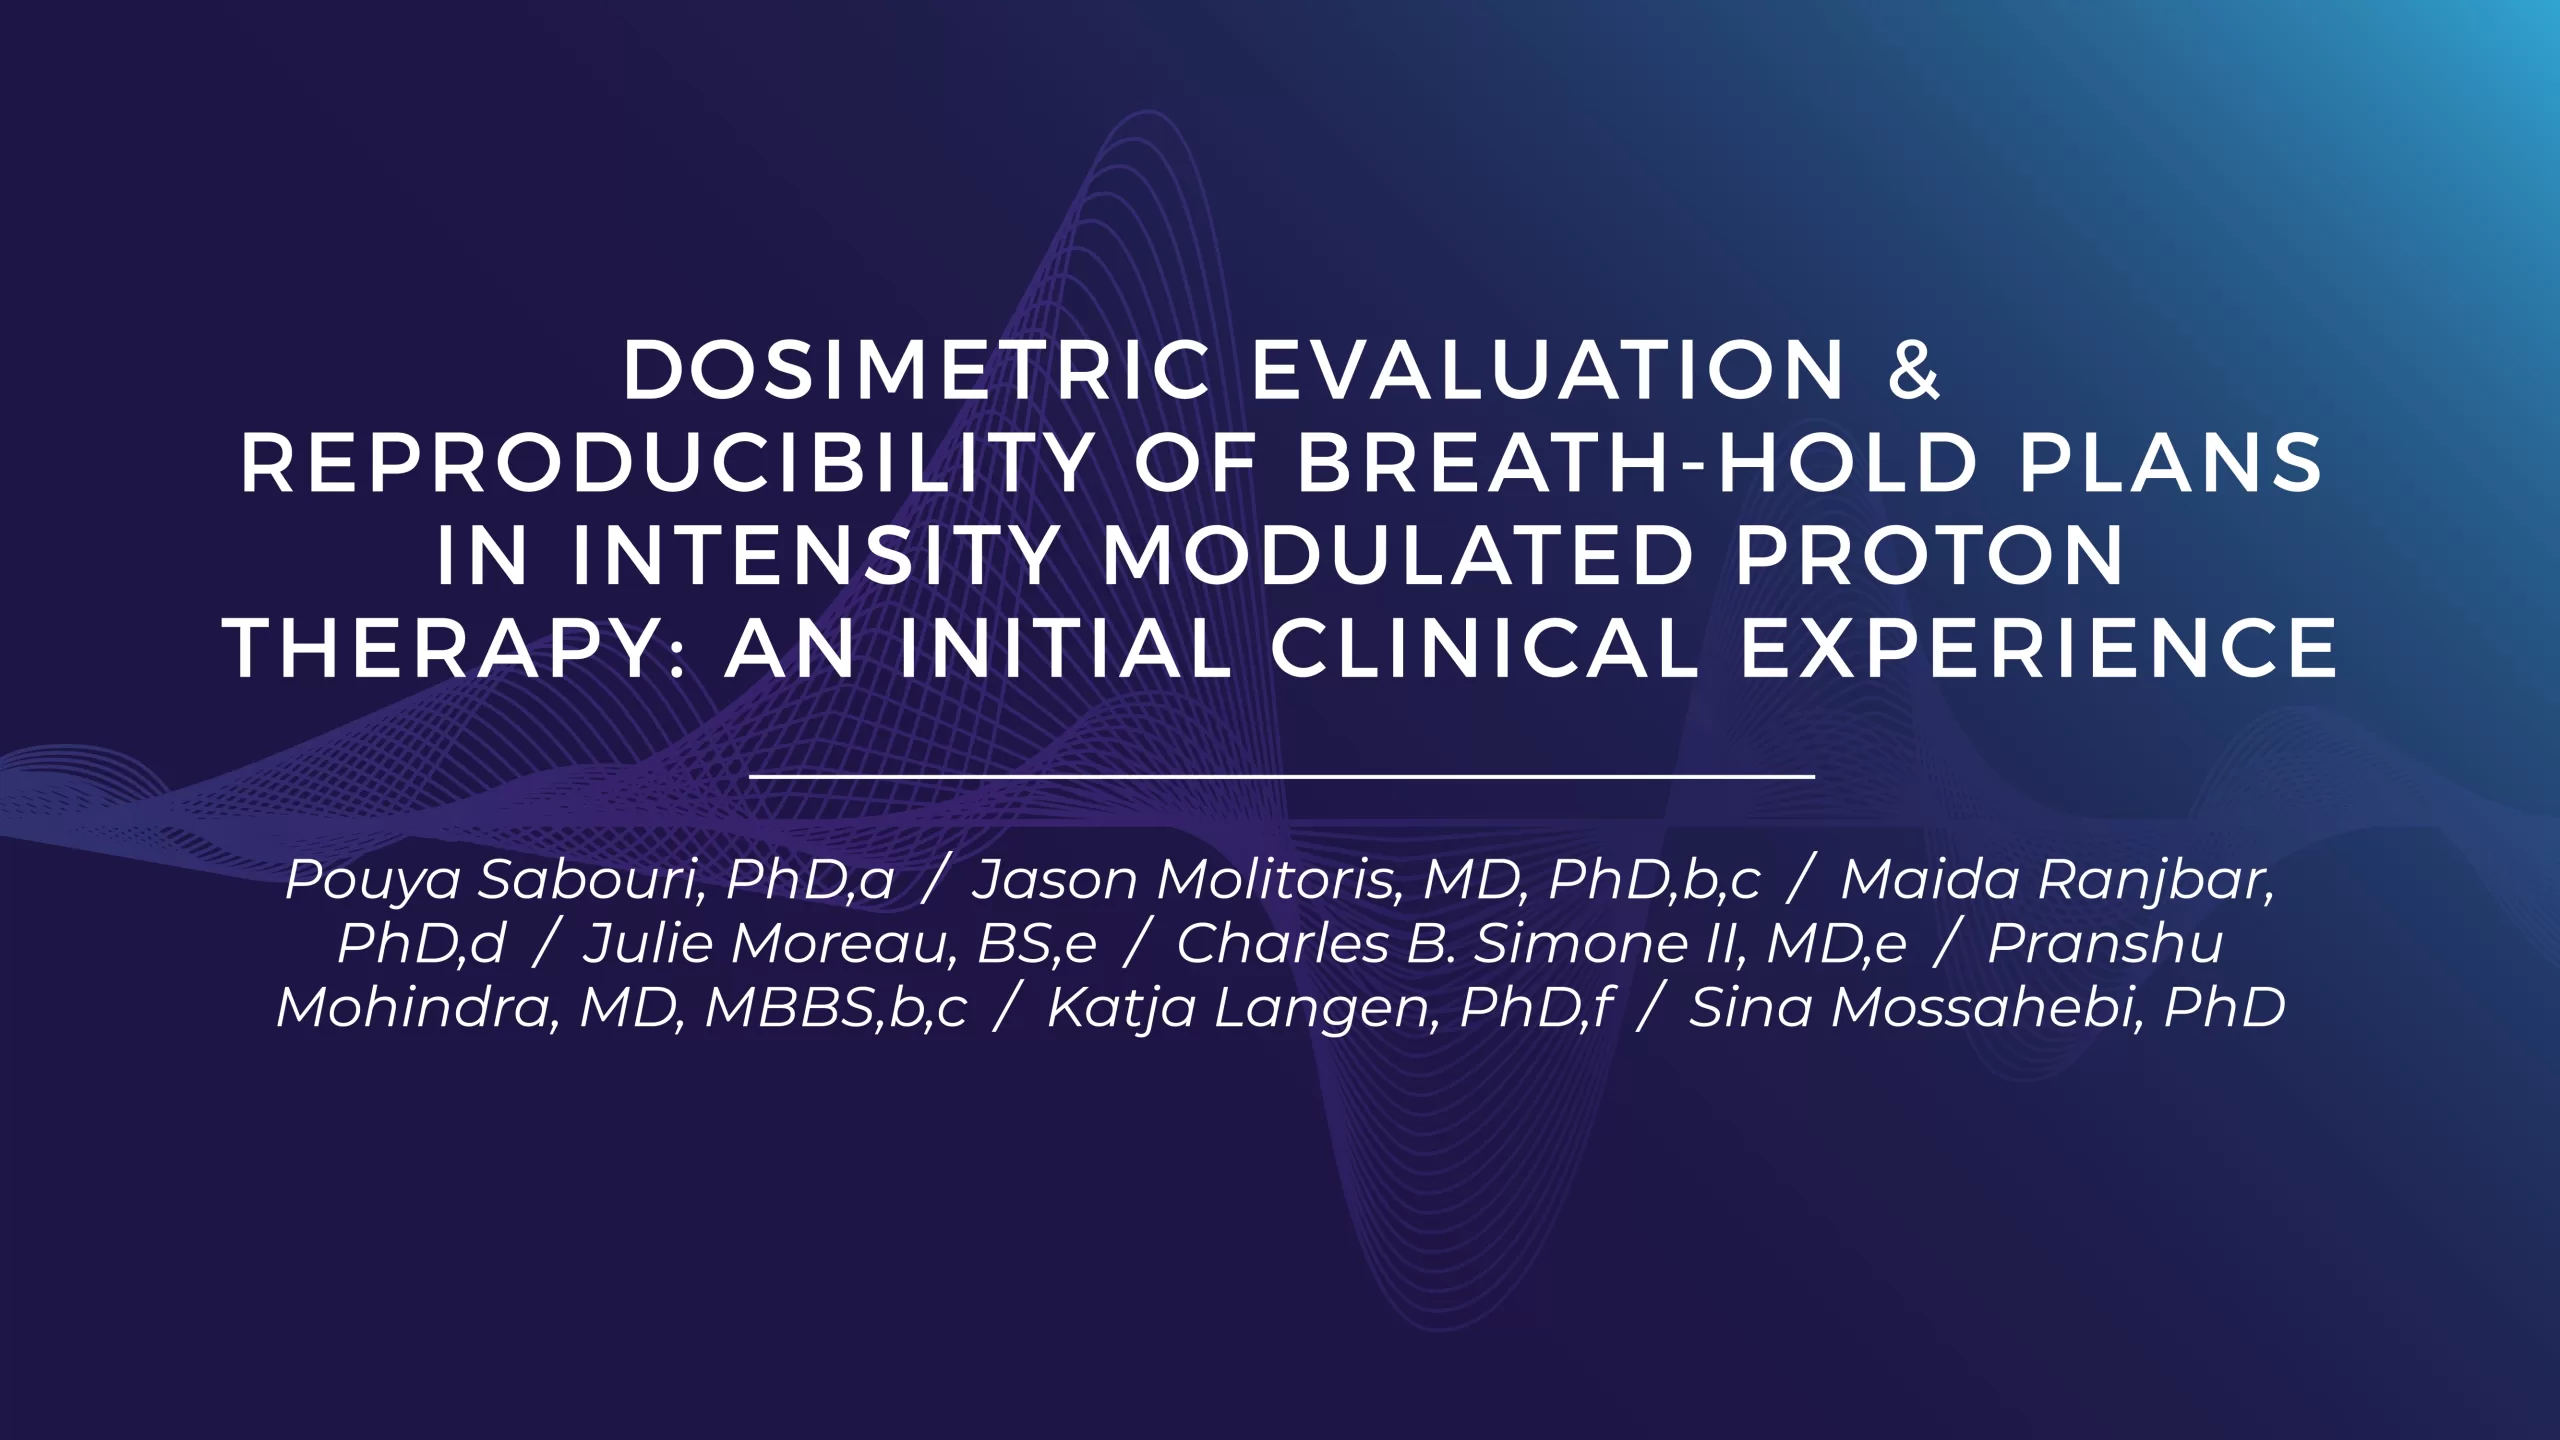 "Dosimetric Evaluation & Reproducibility of Breath-Hold Plans in Intensity Modulated Proton Therapy: An Initial Clinical Experience"